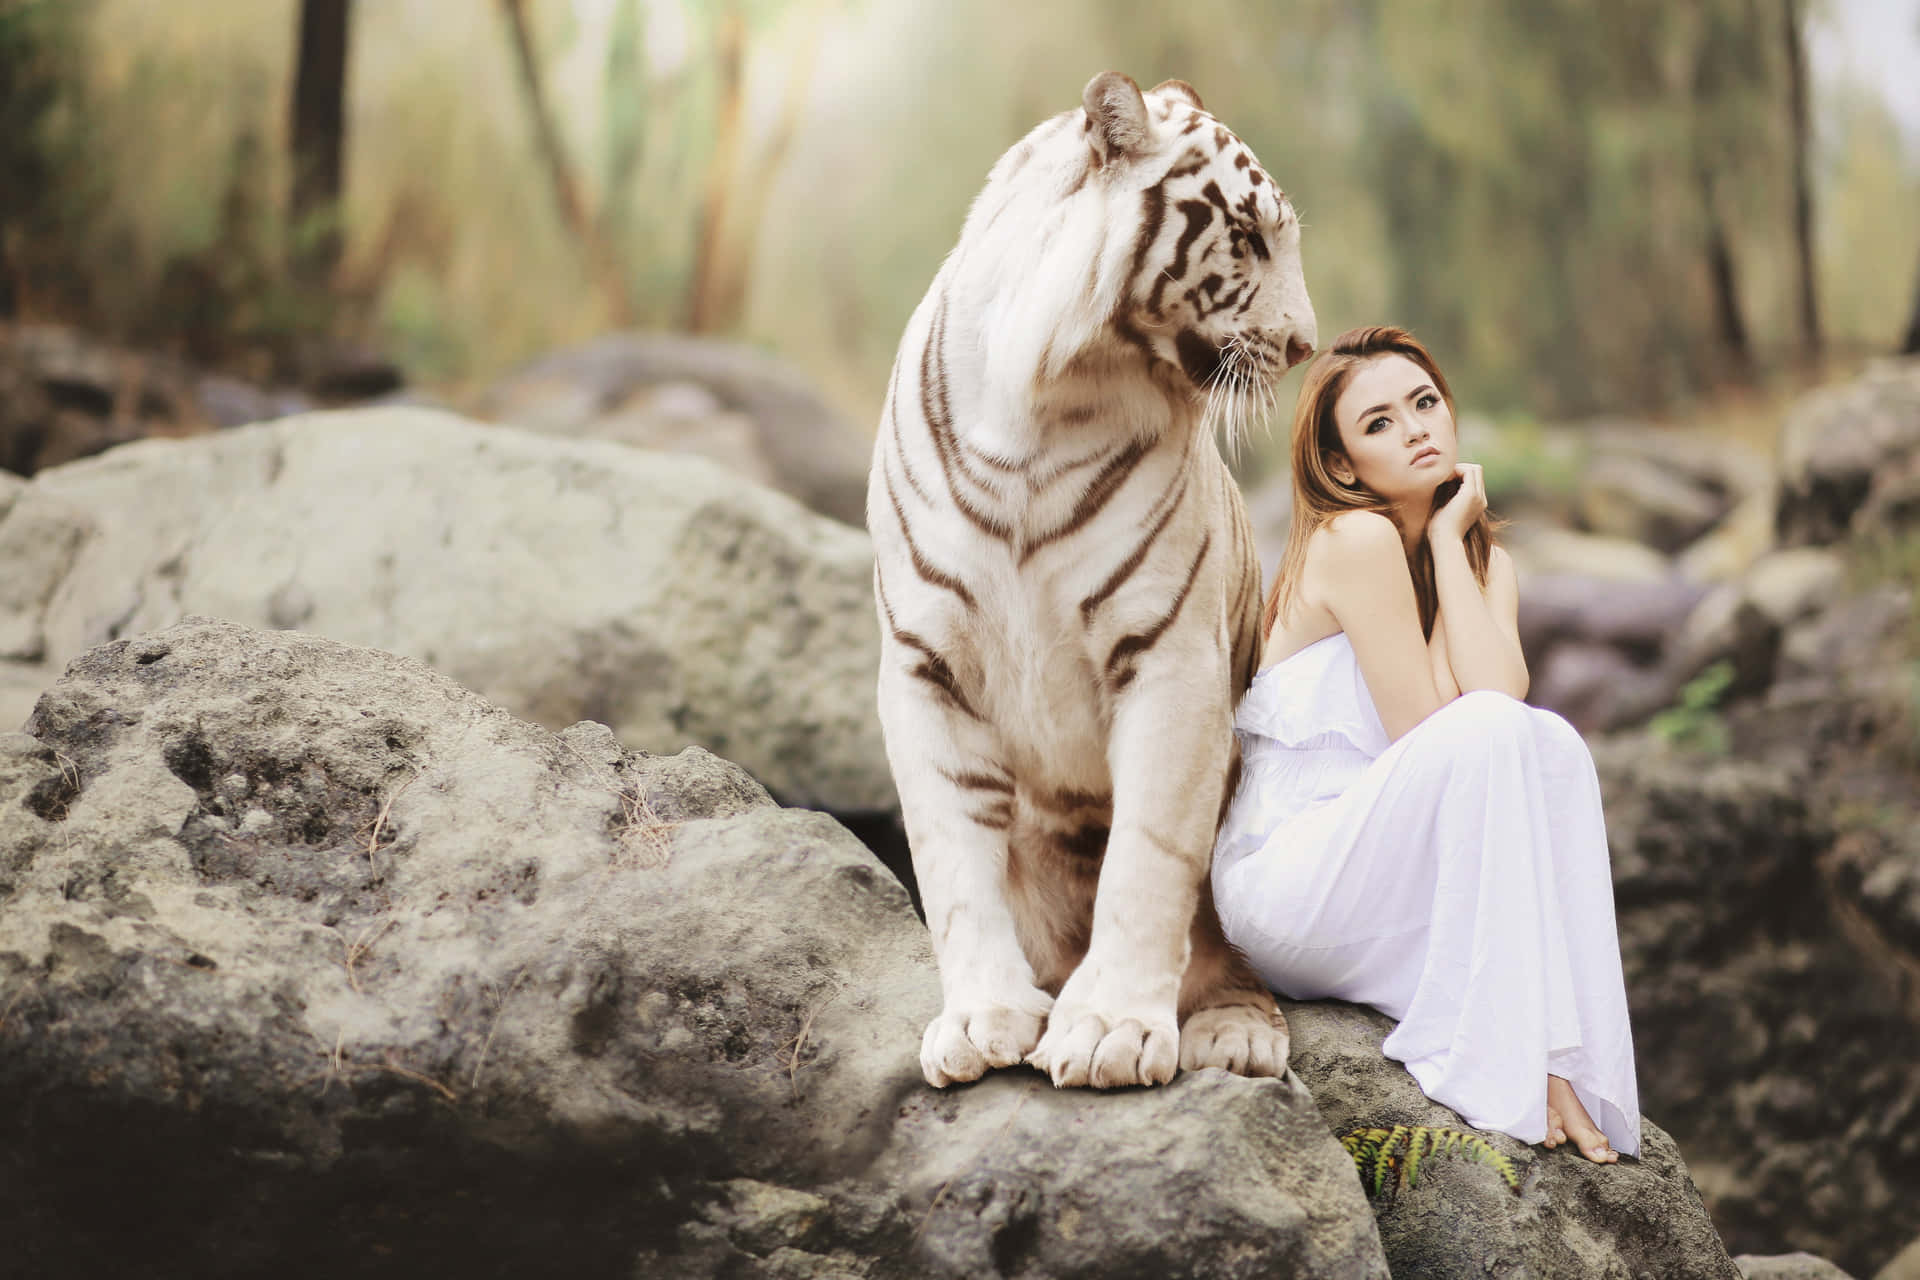 Majestic white tiger relaxing in its natural habitat